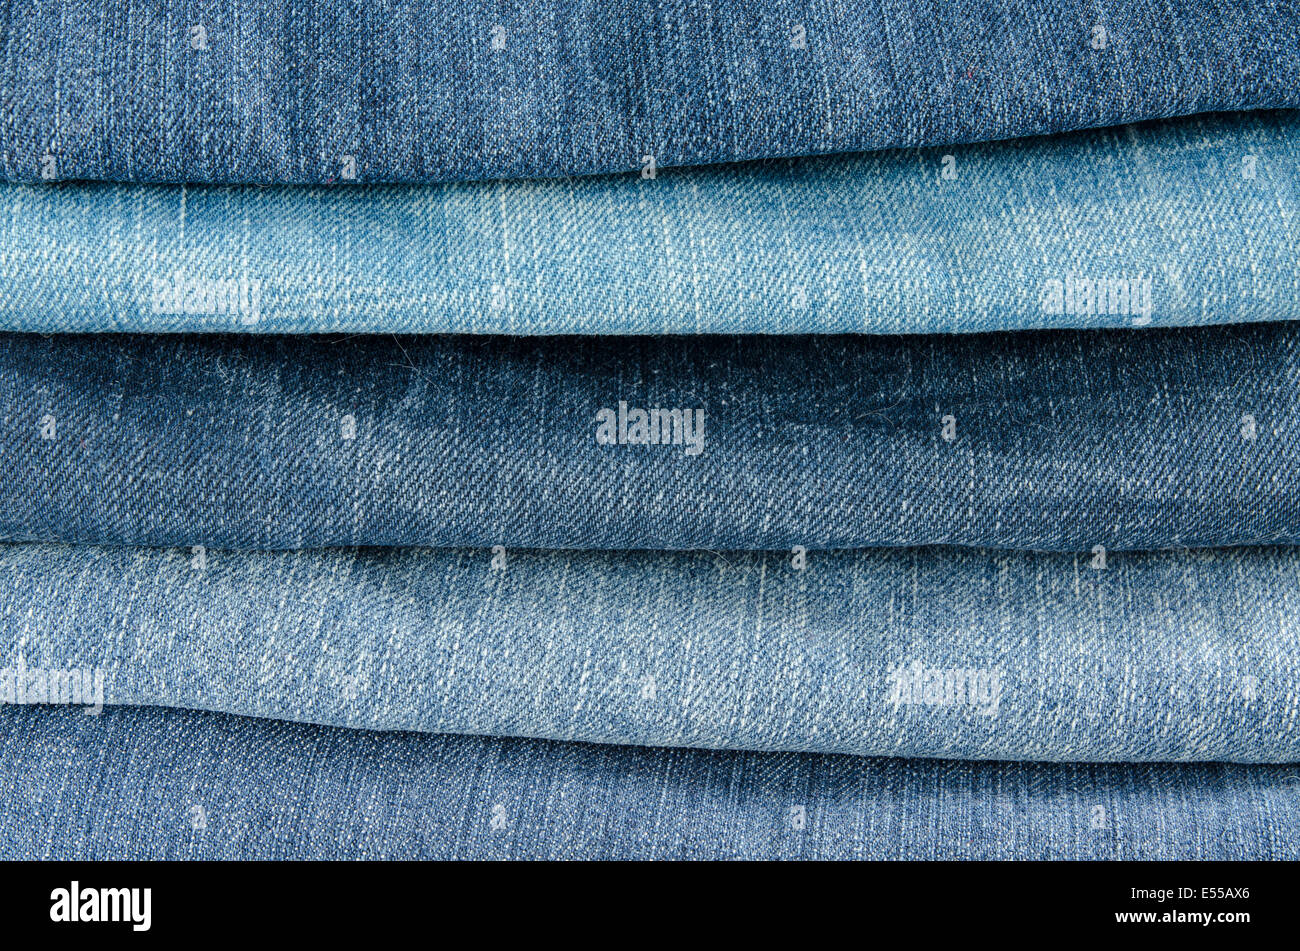 Large Elastic Waistband In Jeans Denim Texture Blue Jeans Background  Closeup Copy Space Stock Photo - Download Image Now - iStock